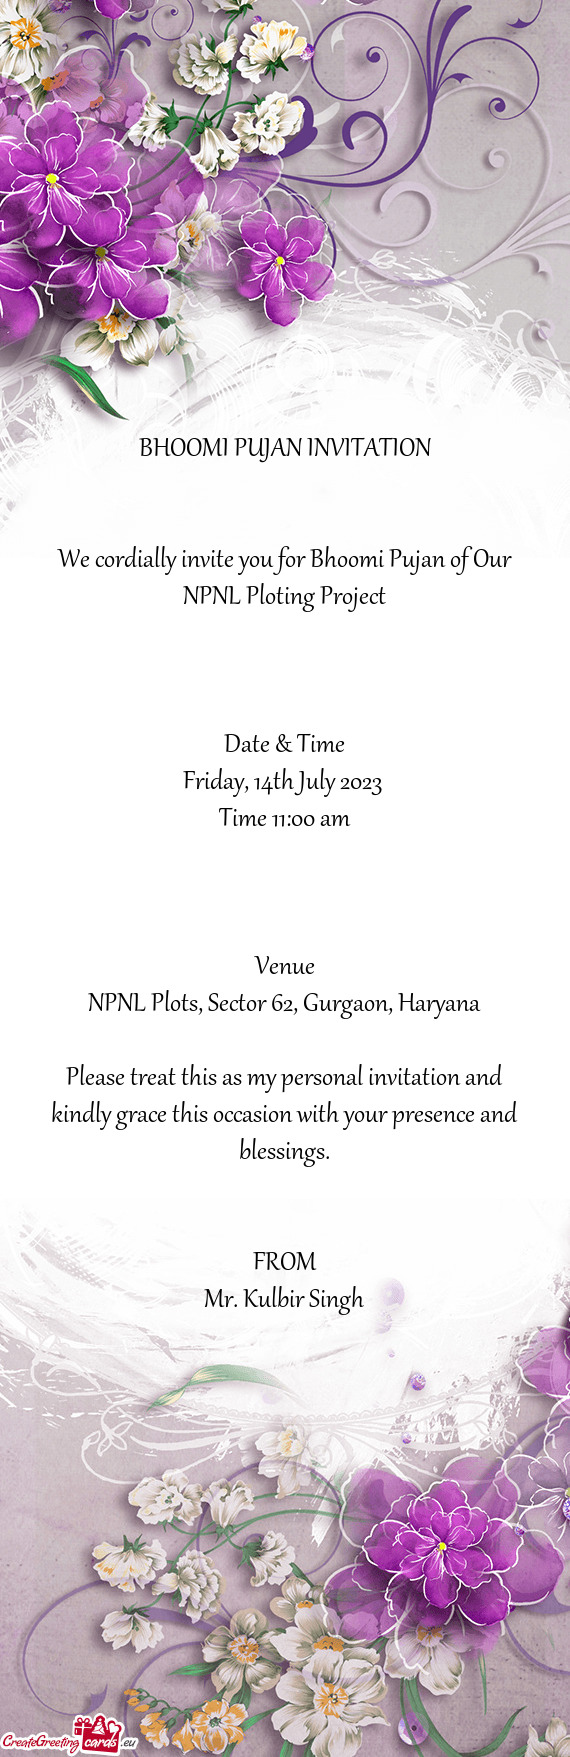 We cordially invite you for Bhoomi Pujan of Our NPNL Ploting Project